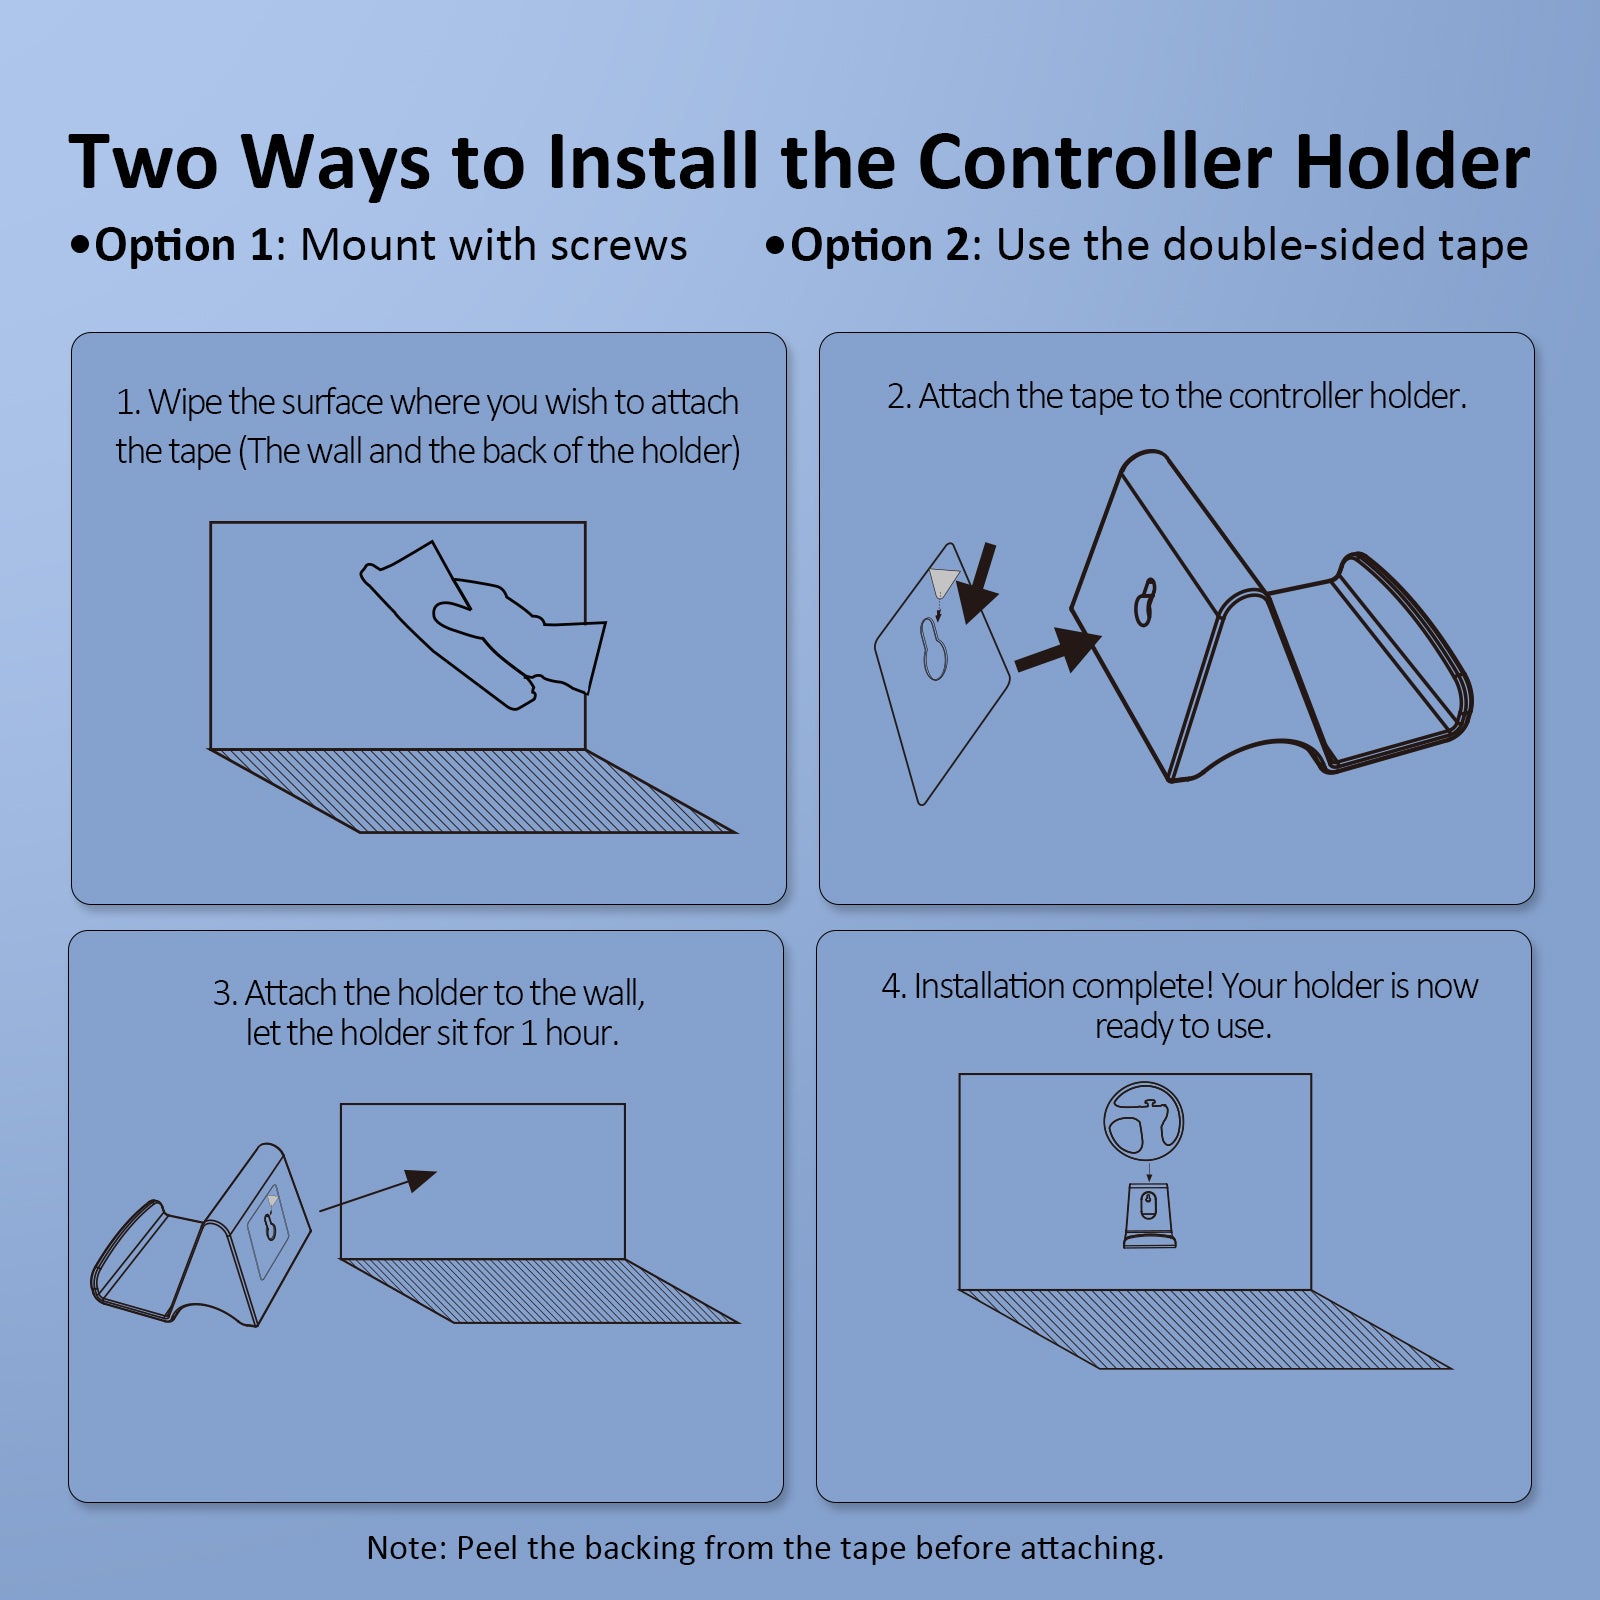 Two installation options for the holder: Use the double-sided tape or mount it with screws.